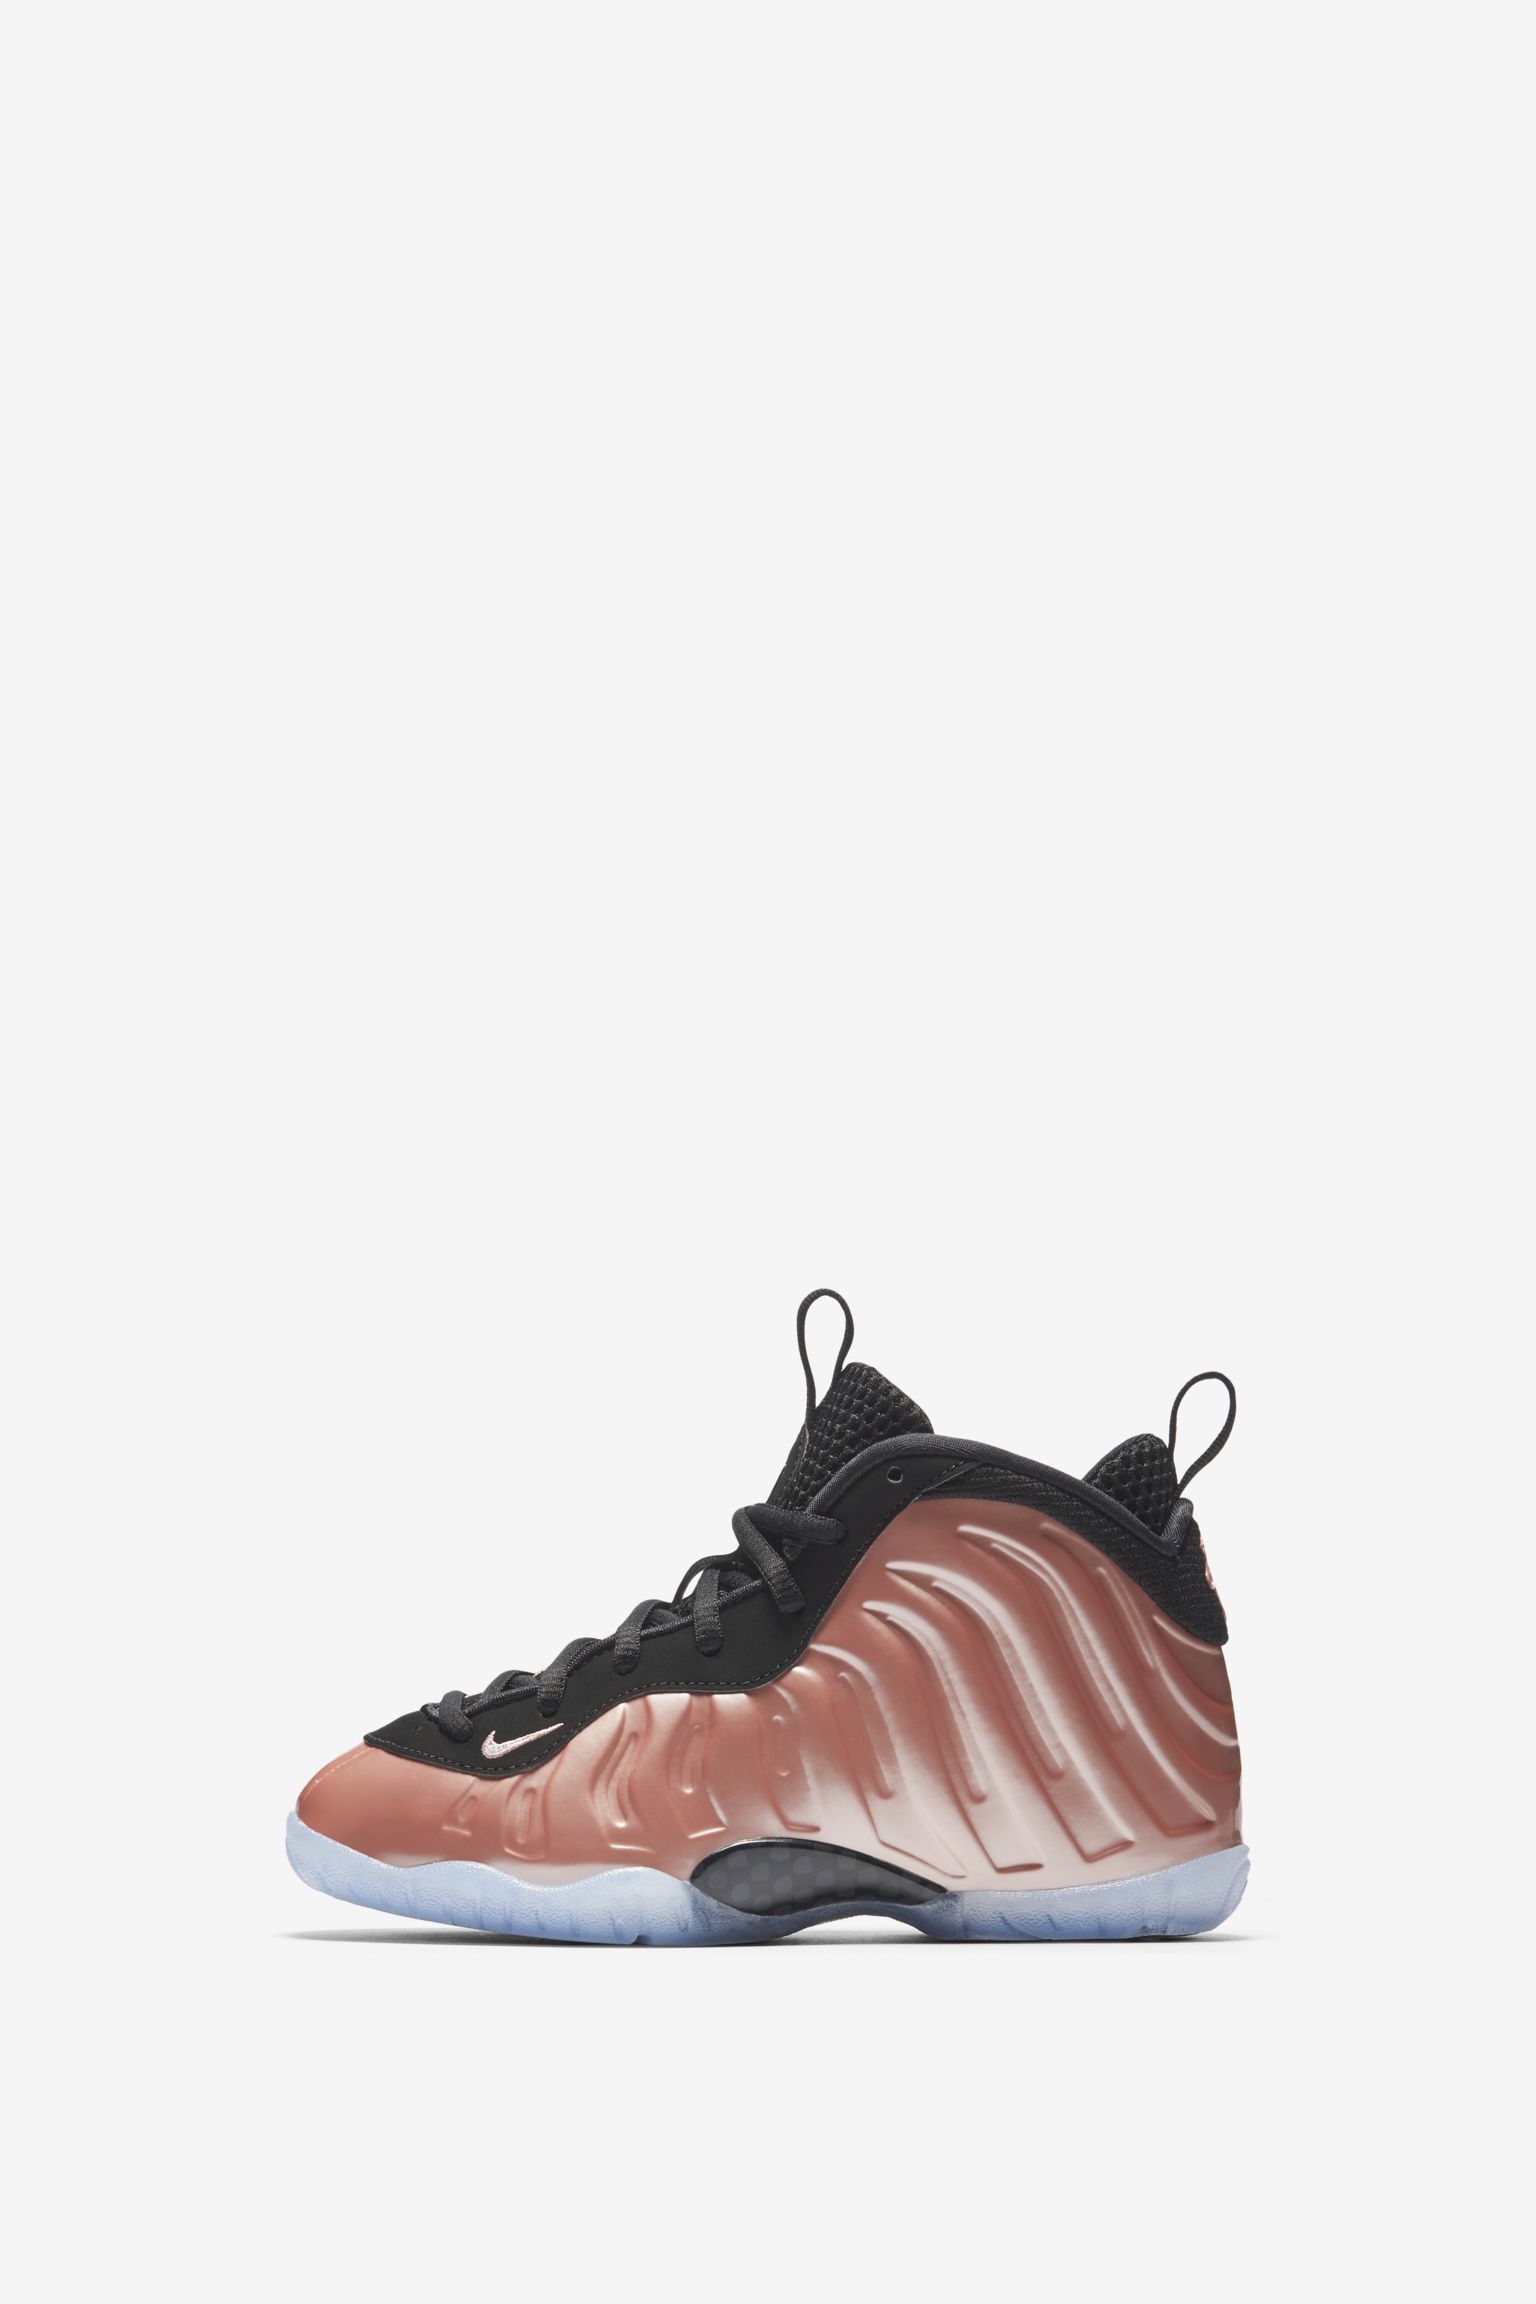 nike little posite one pink